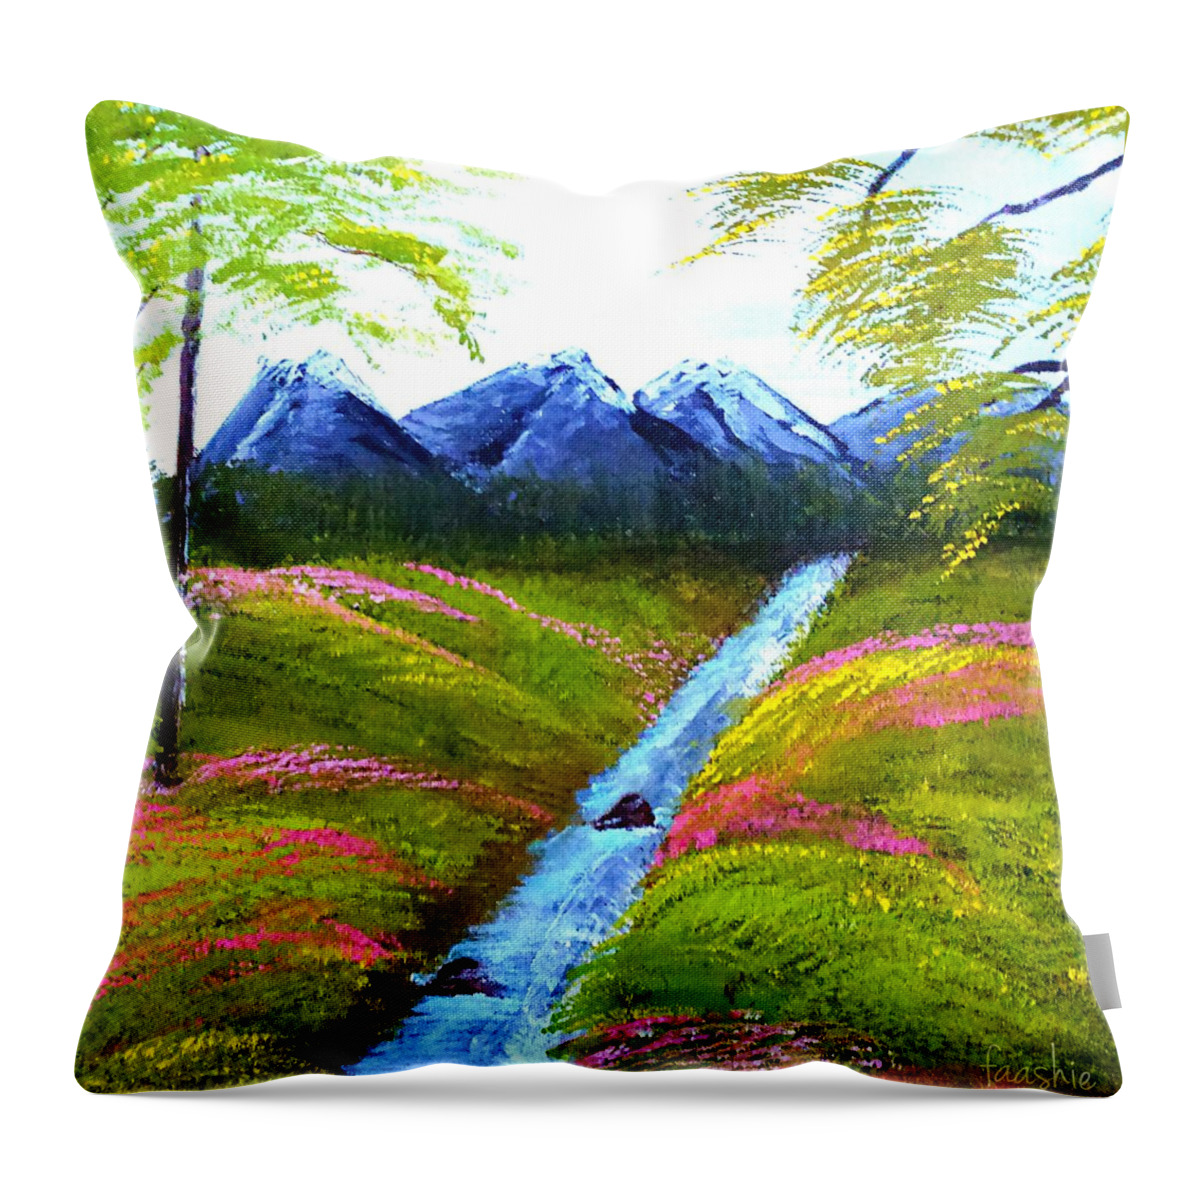 Riverside Throw Pillow featuring the painting Riverside by Faashie Sha